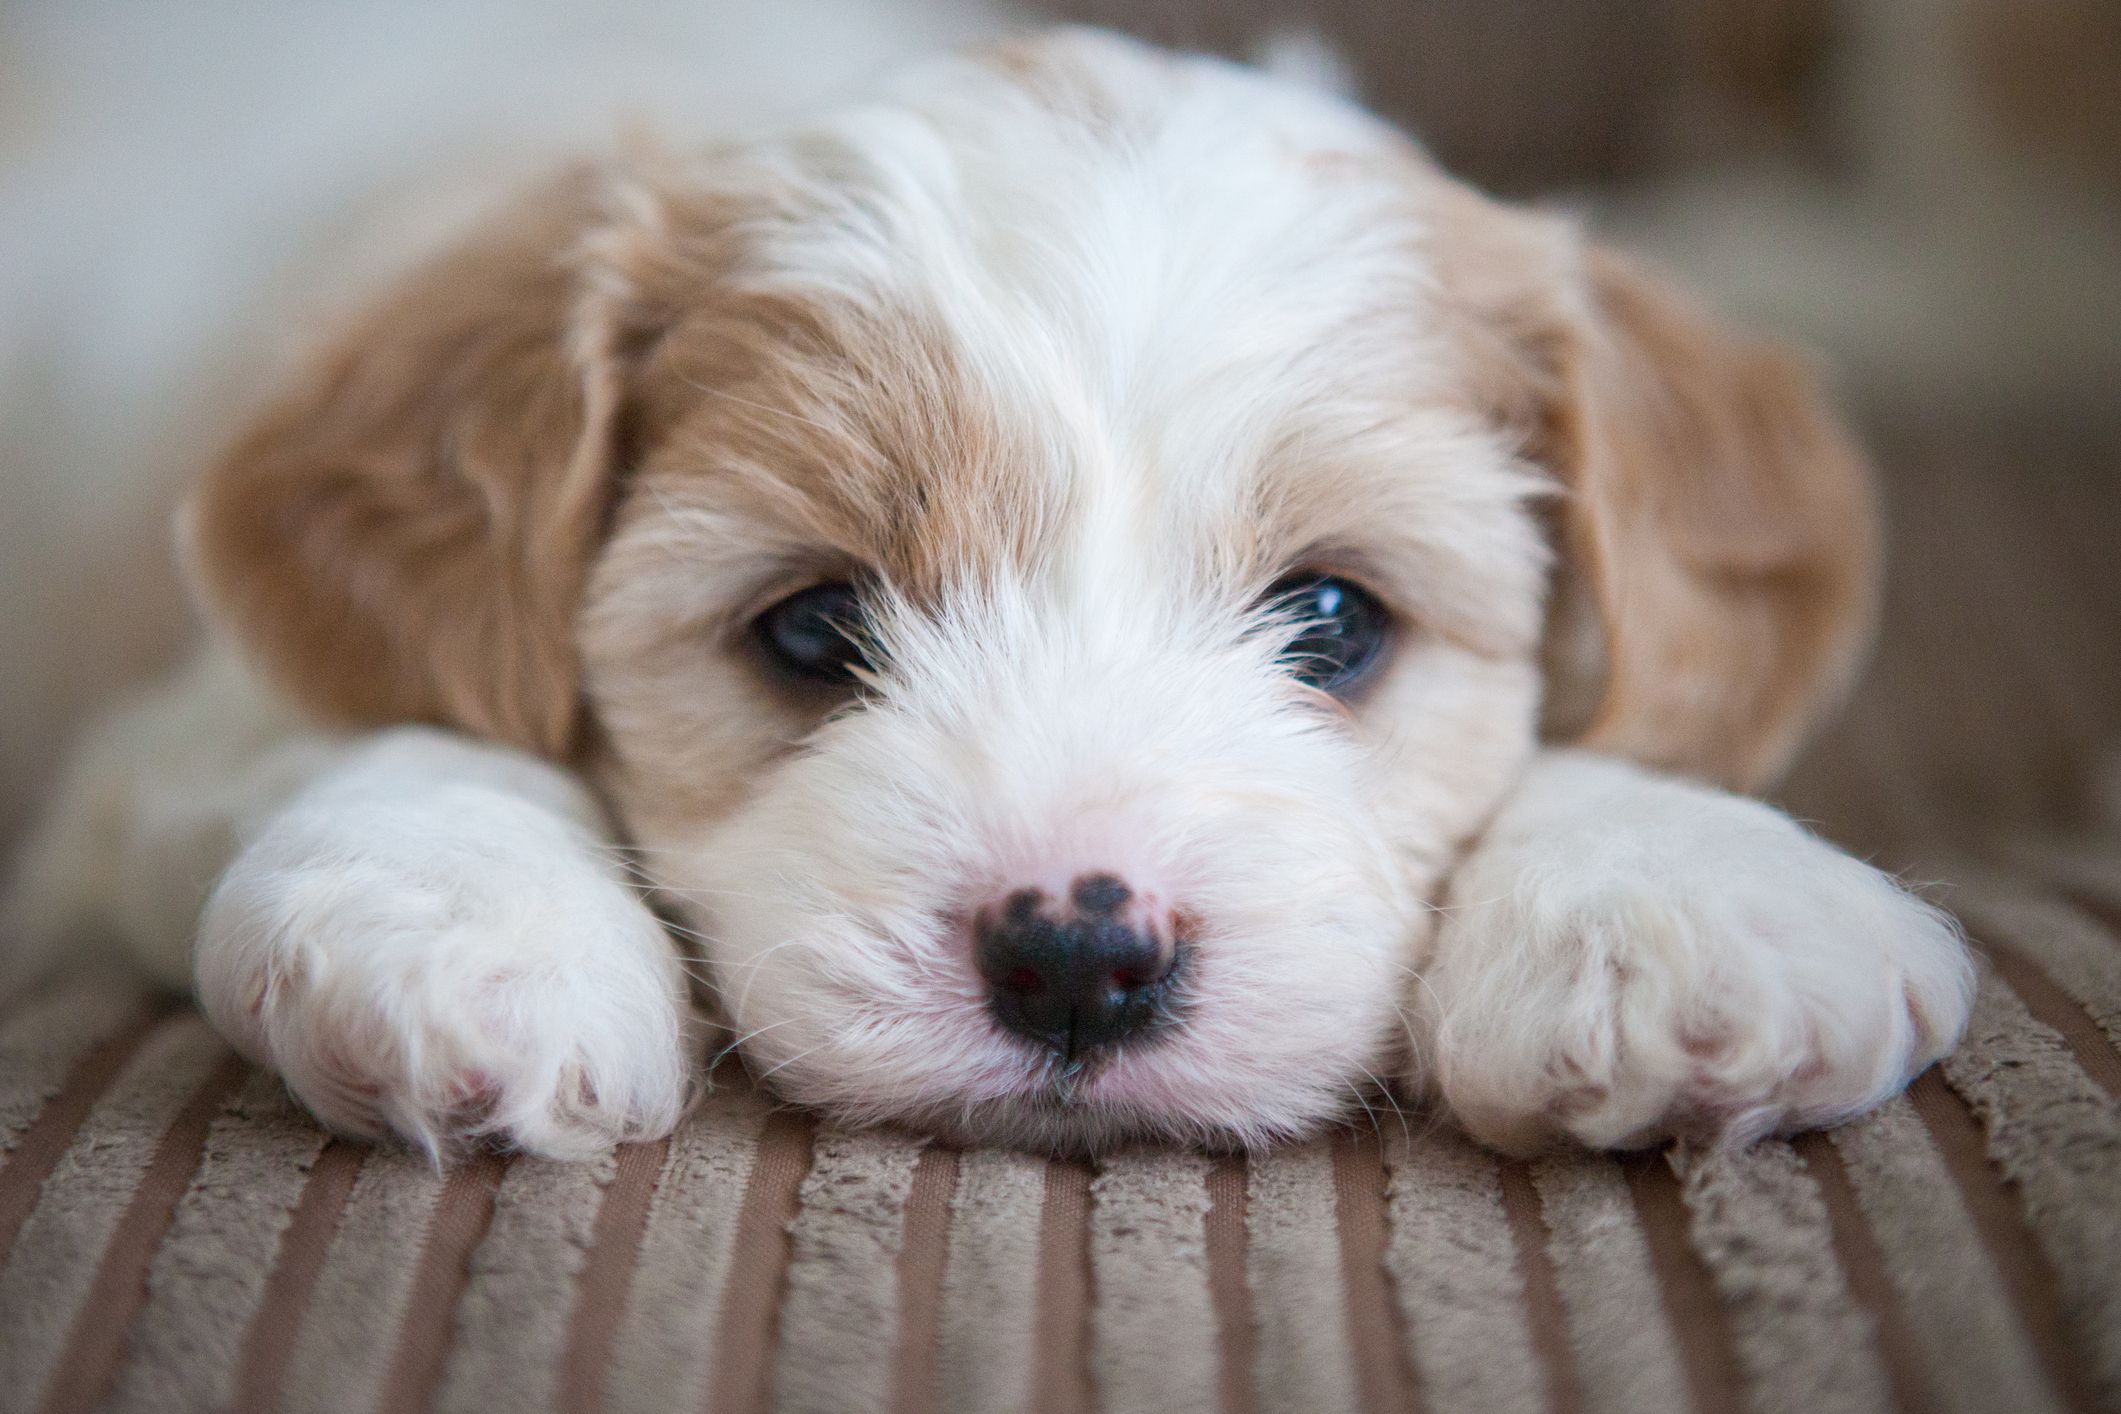 Buying a puppy - 6 things to know before buying a puppy this Christmas